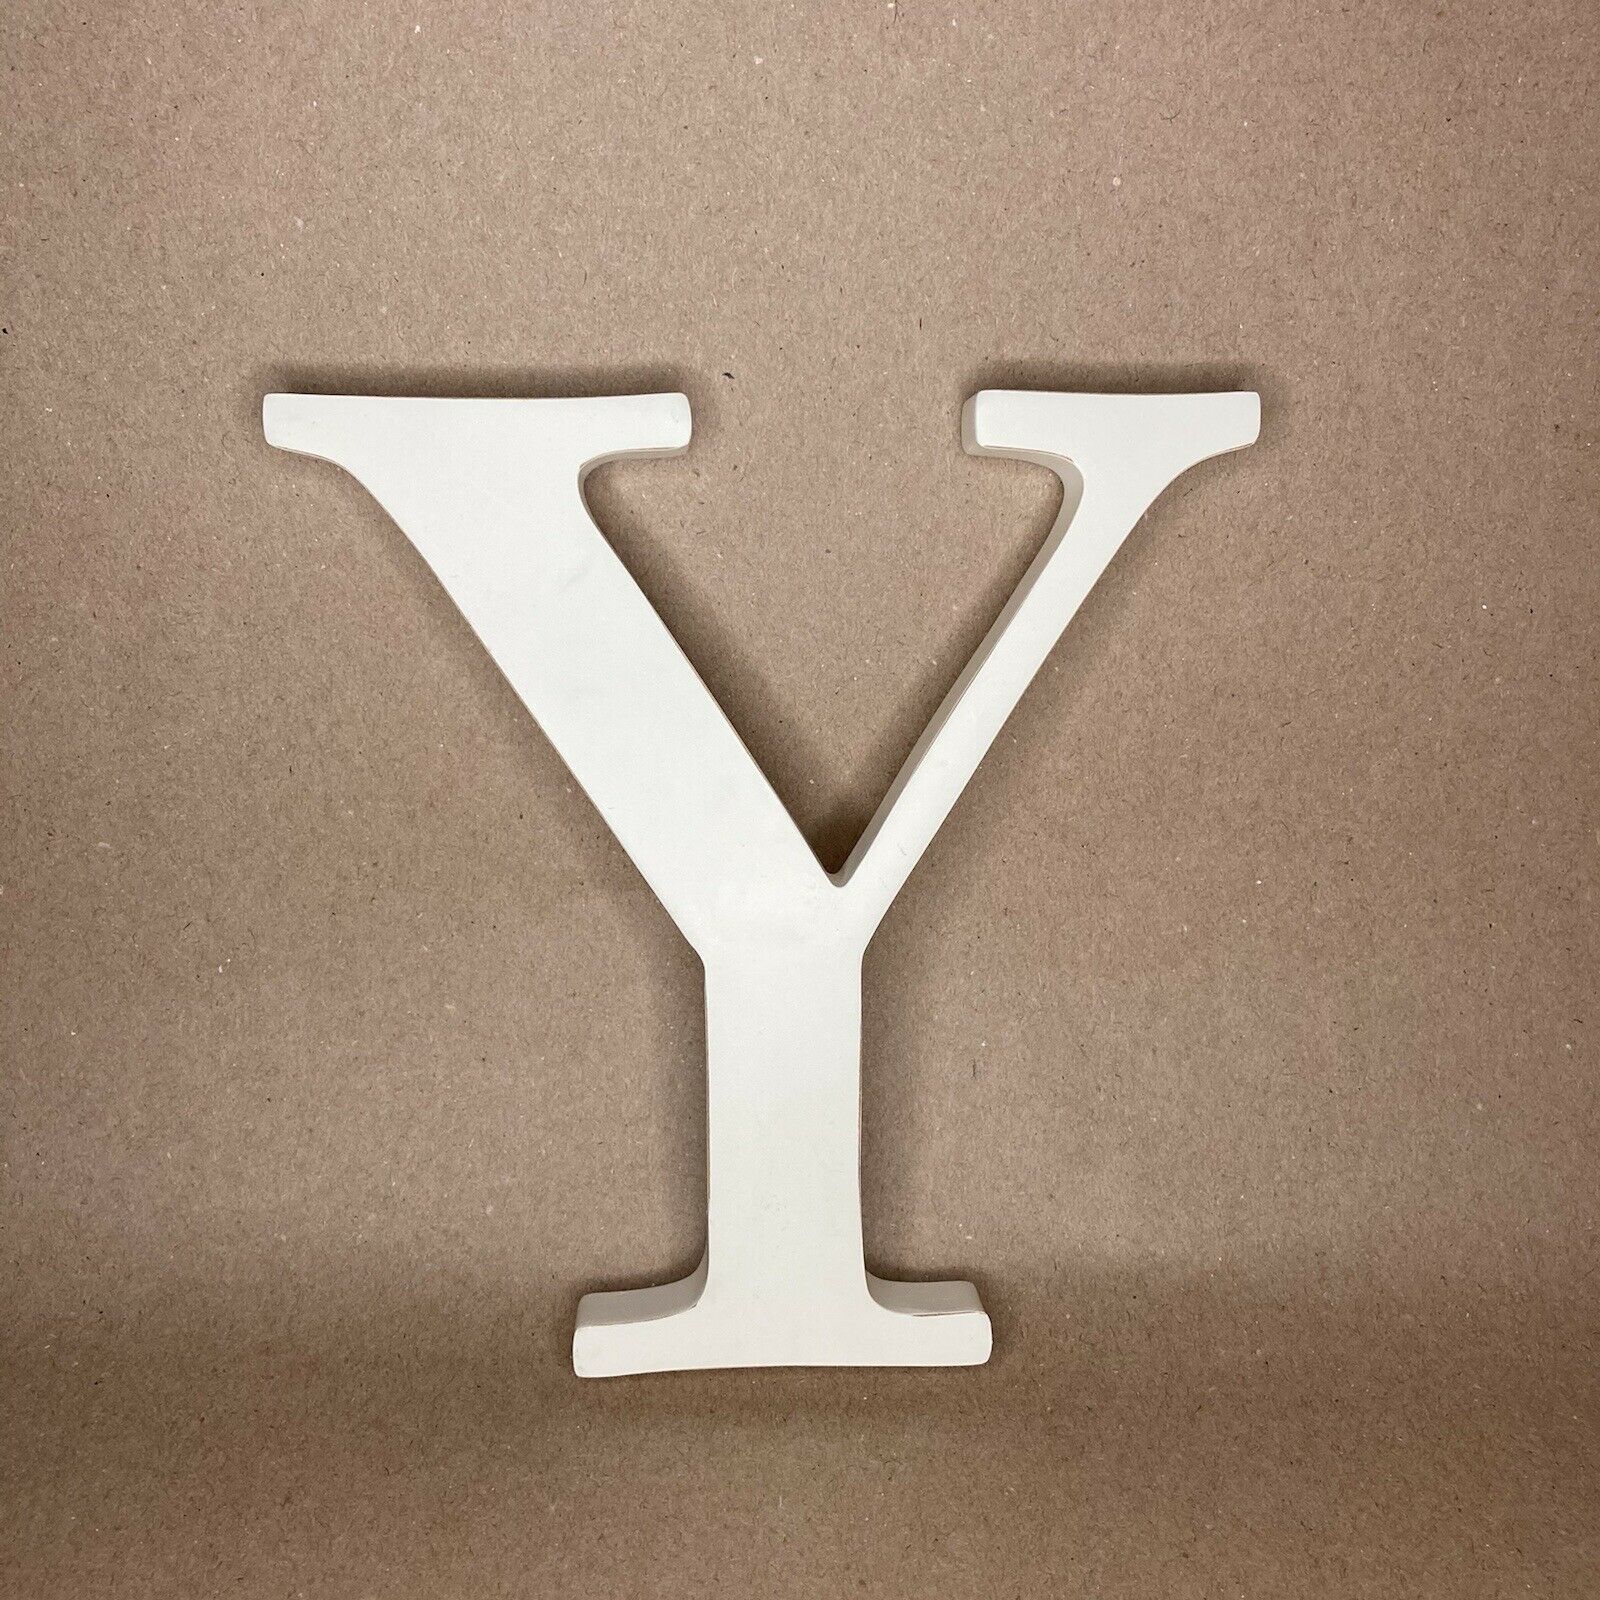 Pottery Barn Kids Oversized Wall Uppercase Letter 8” White “y” 4334033 Initial